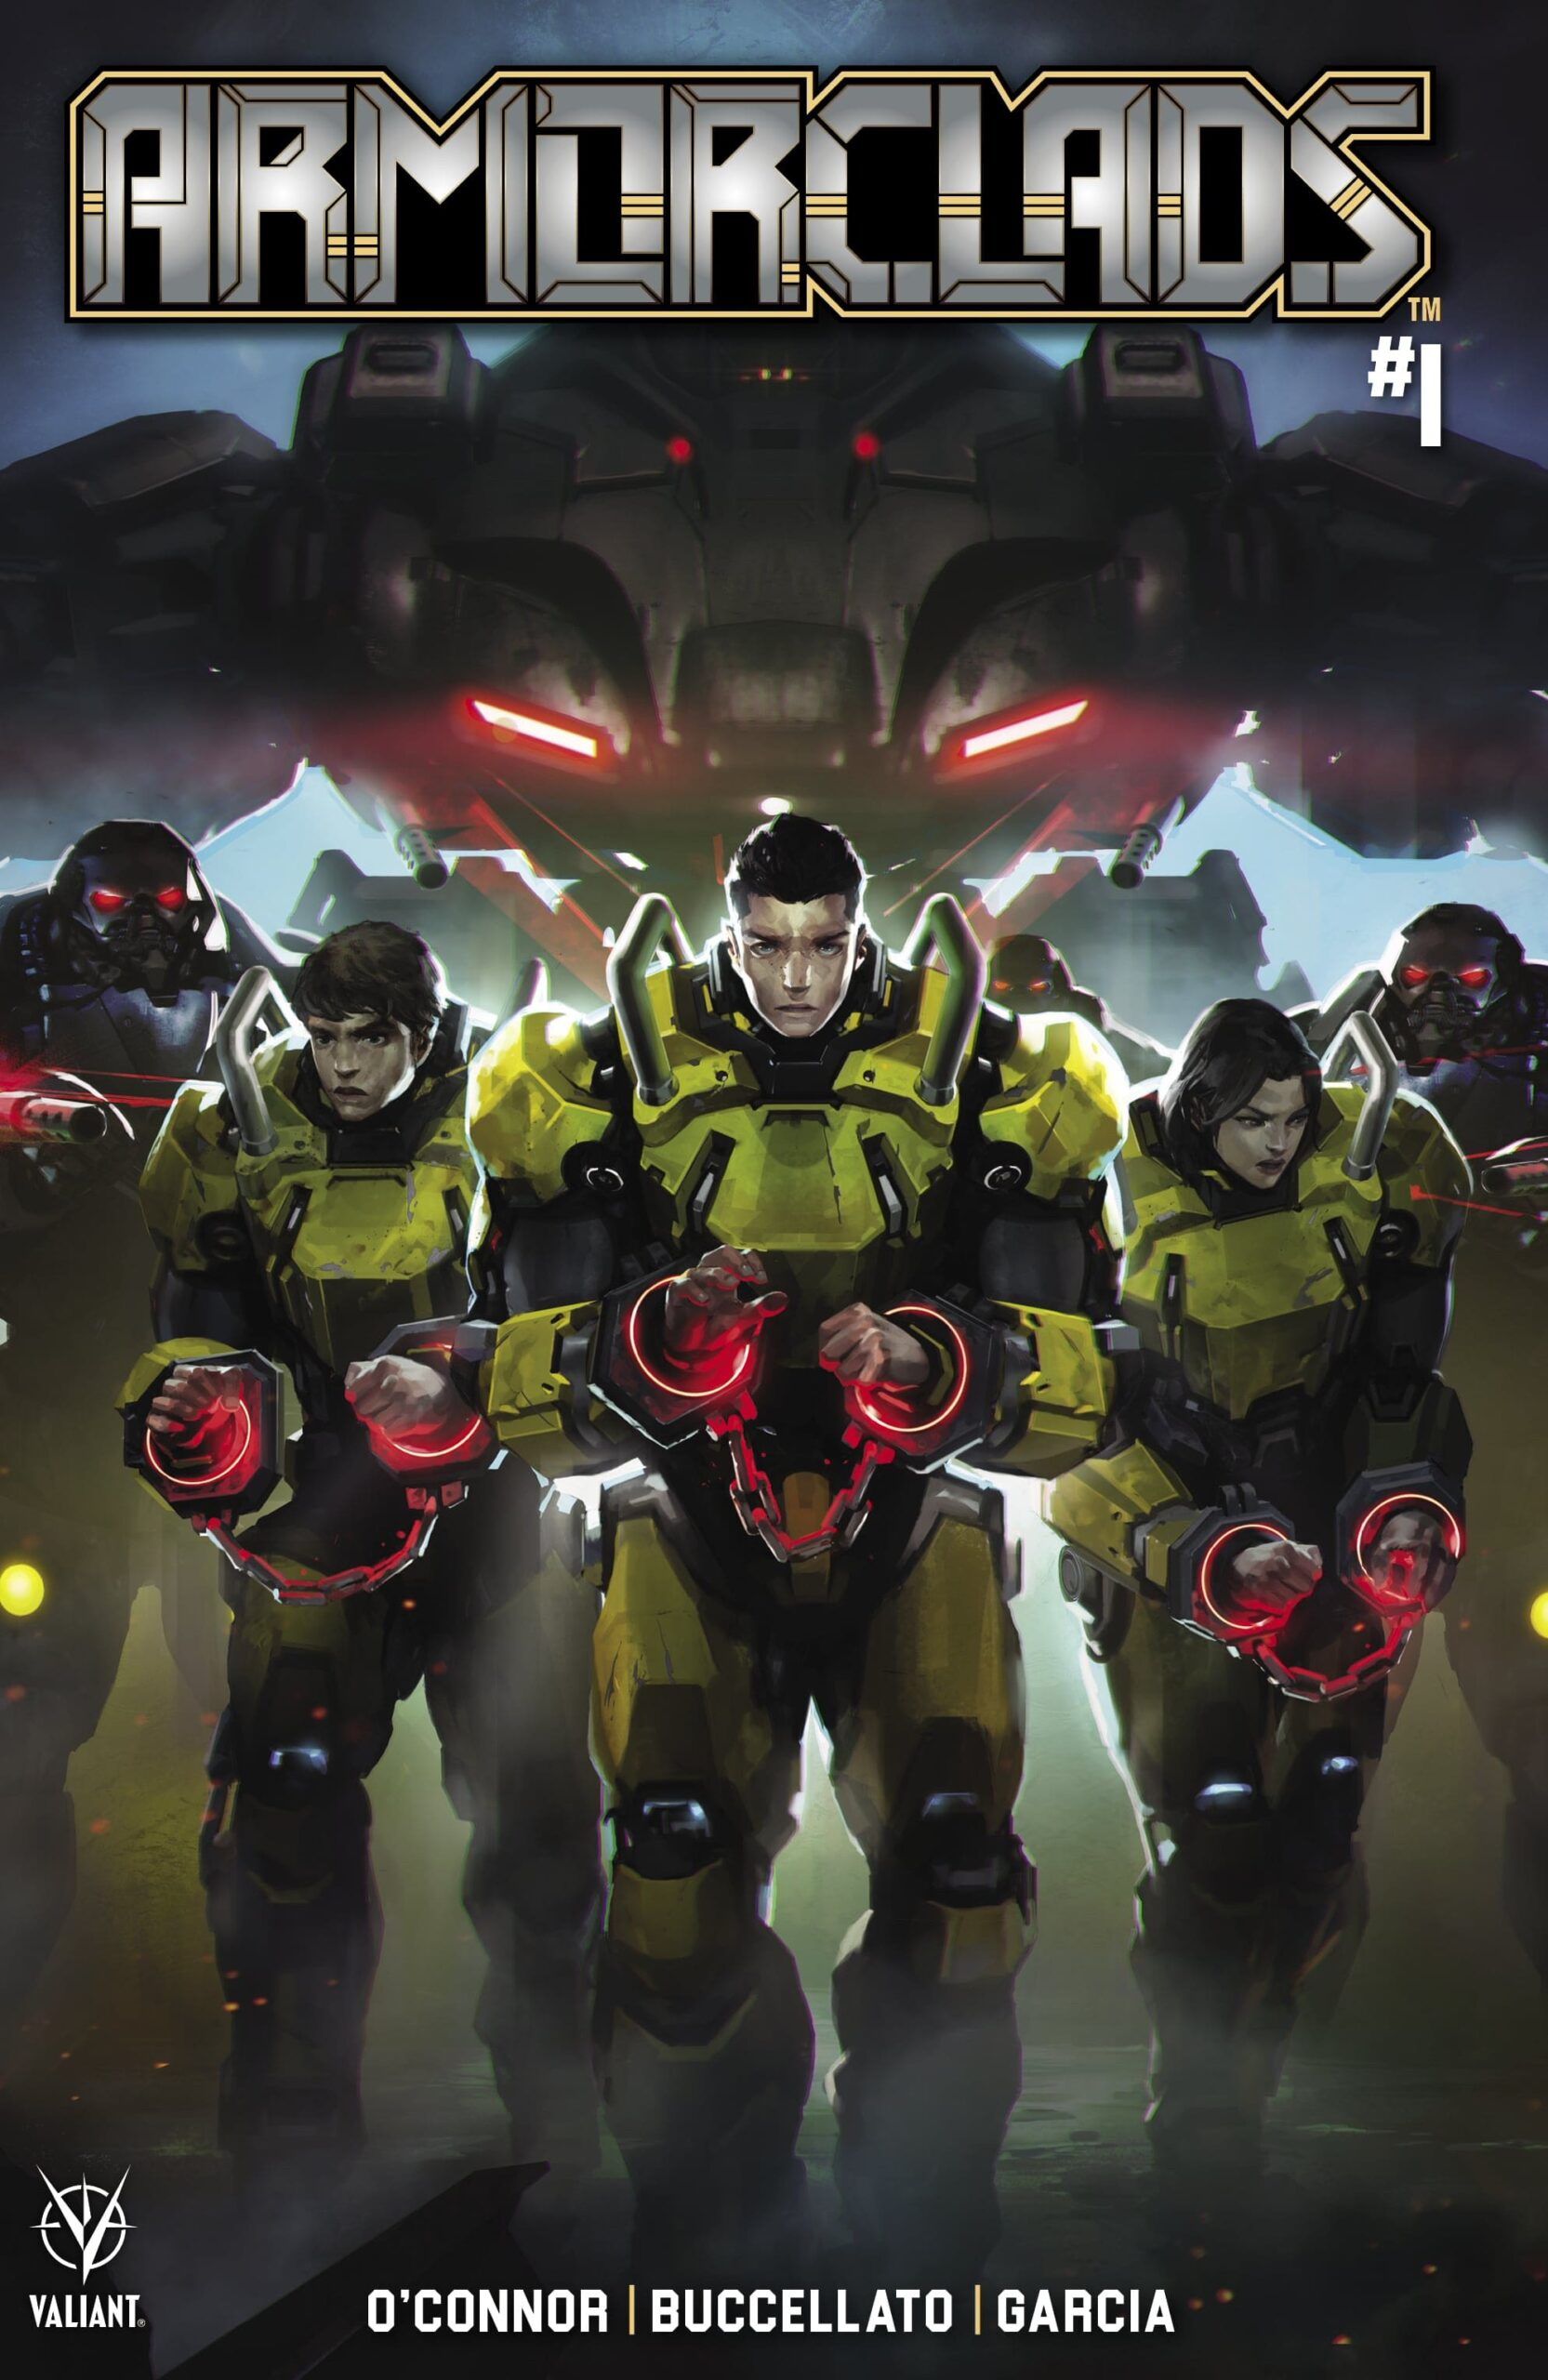 Armorclads 1 cover, showing prisoners in mech suits handcuffed